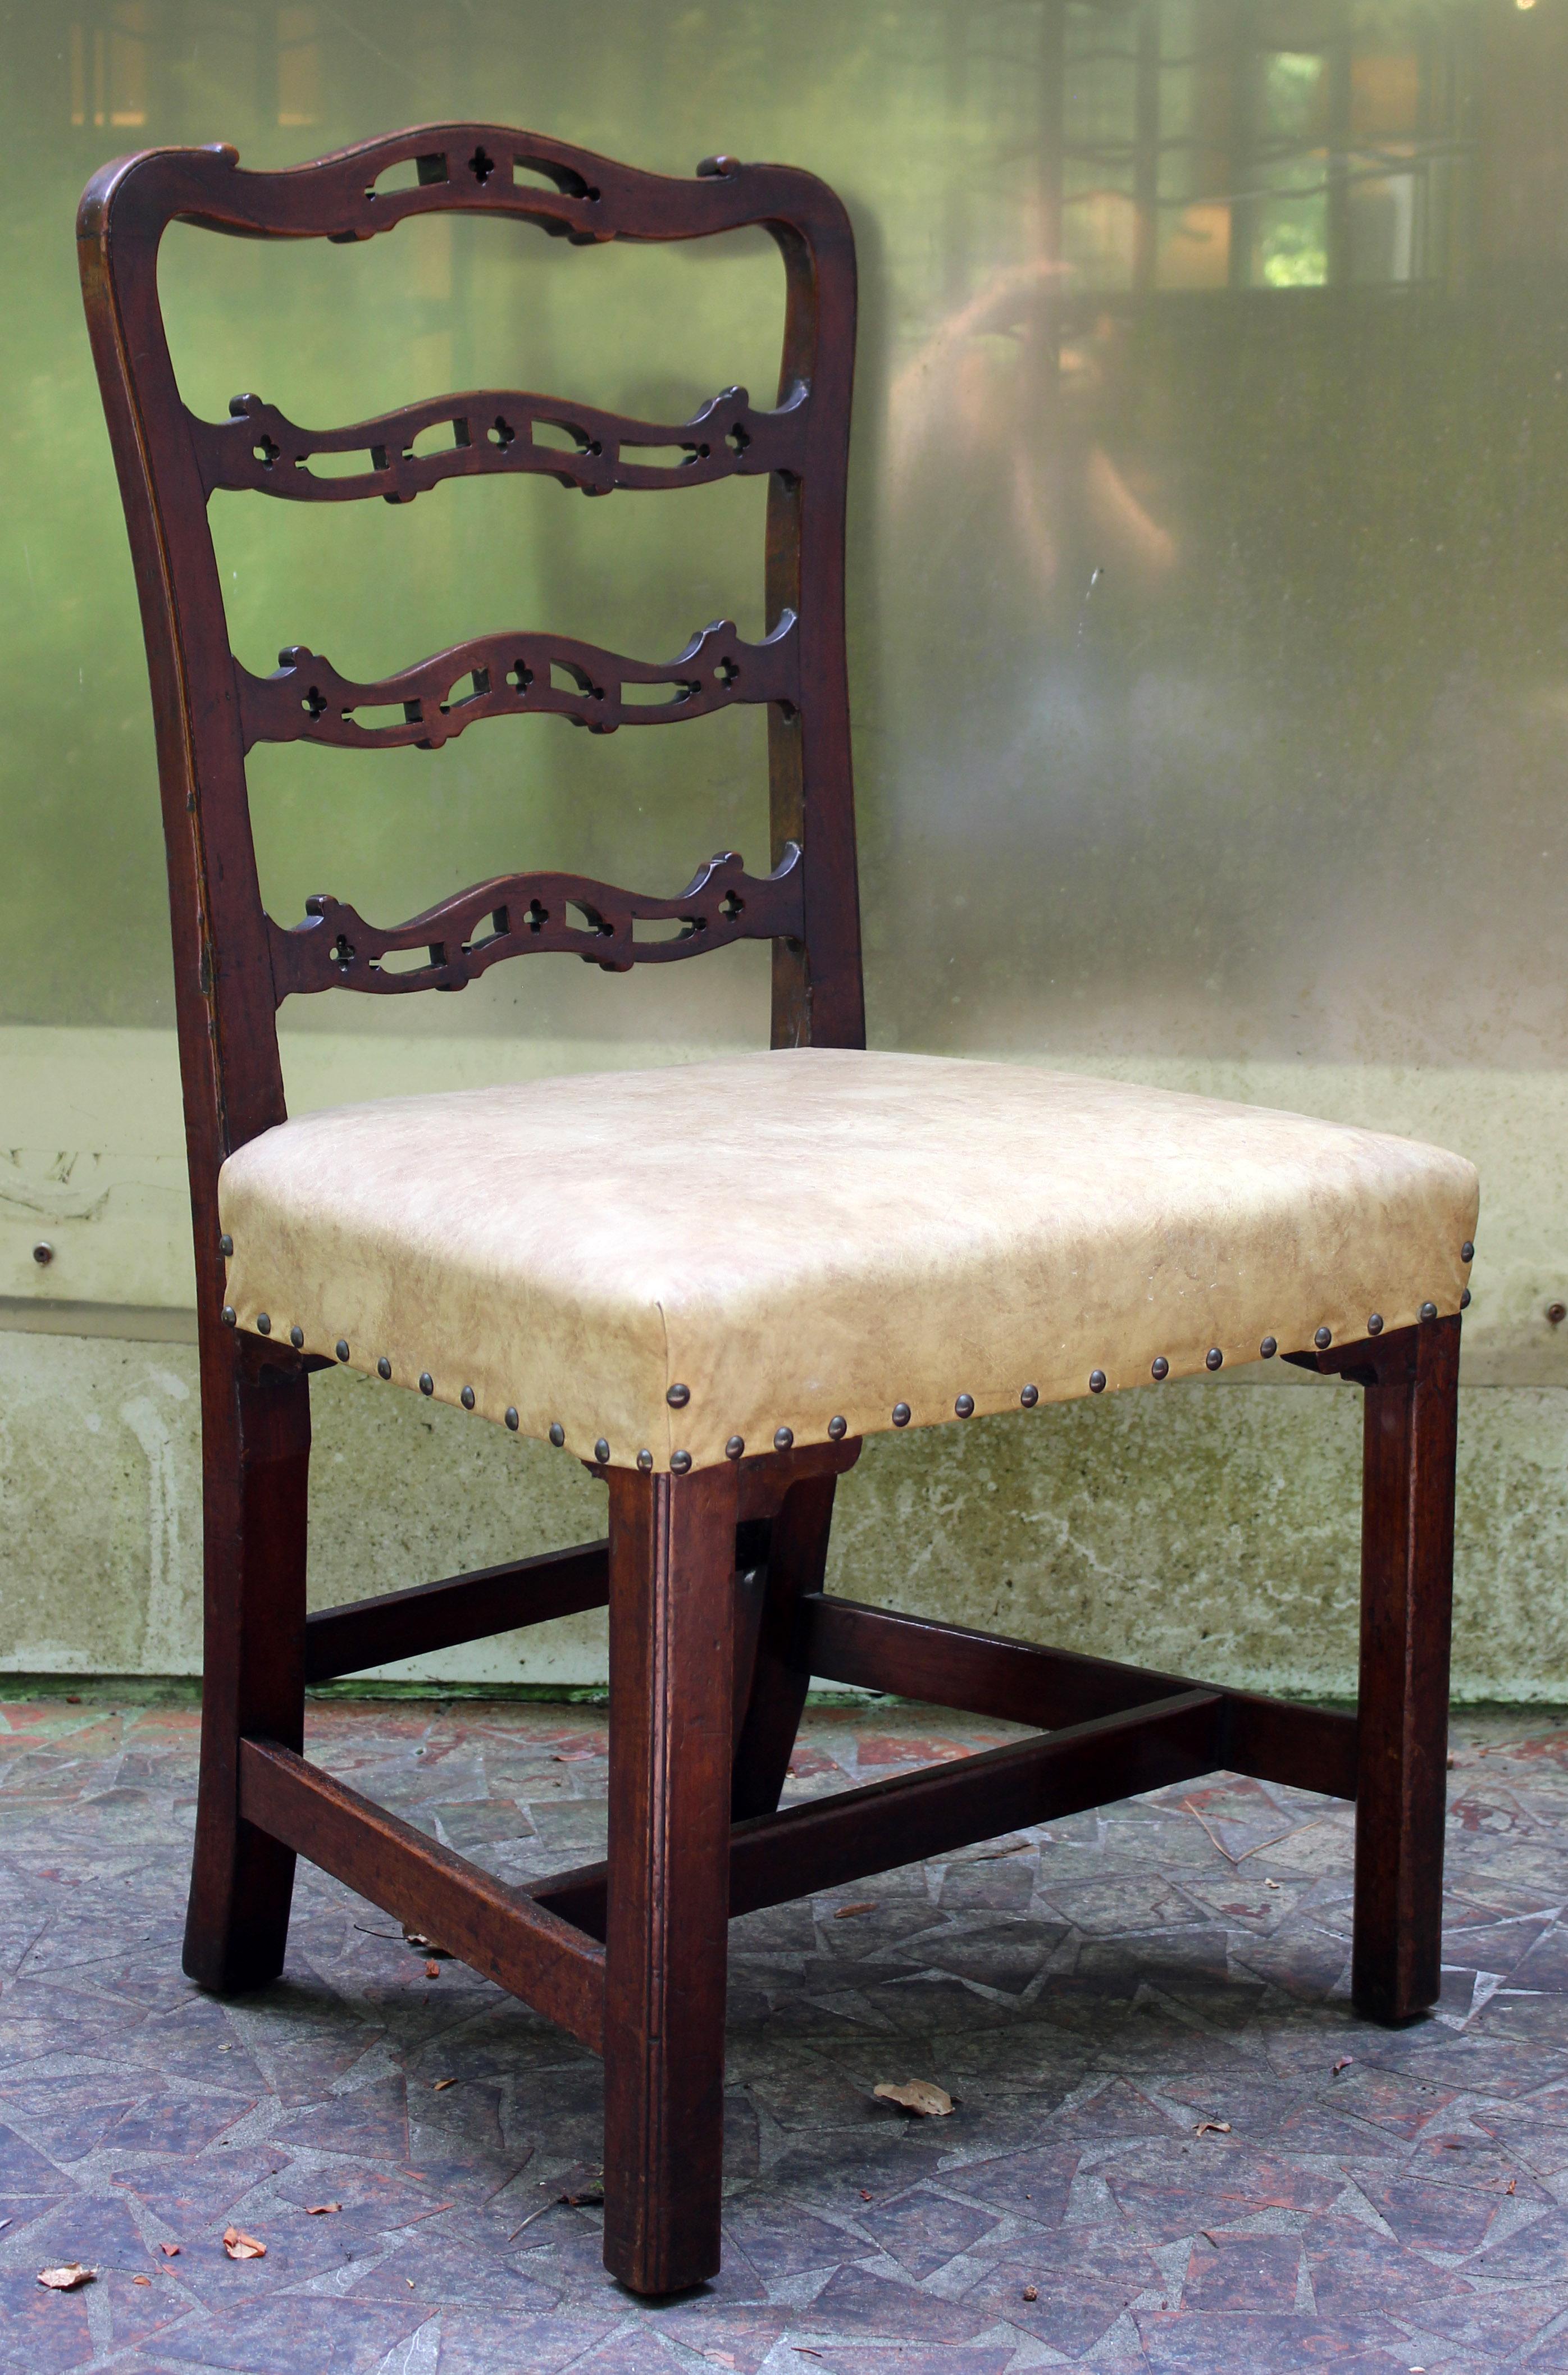 A George III side chair of good, sturdy size. English, c.1760, mahogany. The wavy ladder back with Gothic open cut-work typical of Chippendale design. Stretchered, square molded legs with shaped decorative seat returns. Faux leather upholstery with